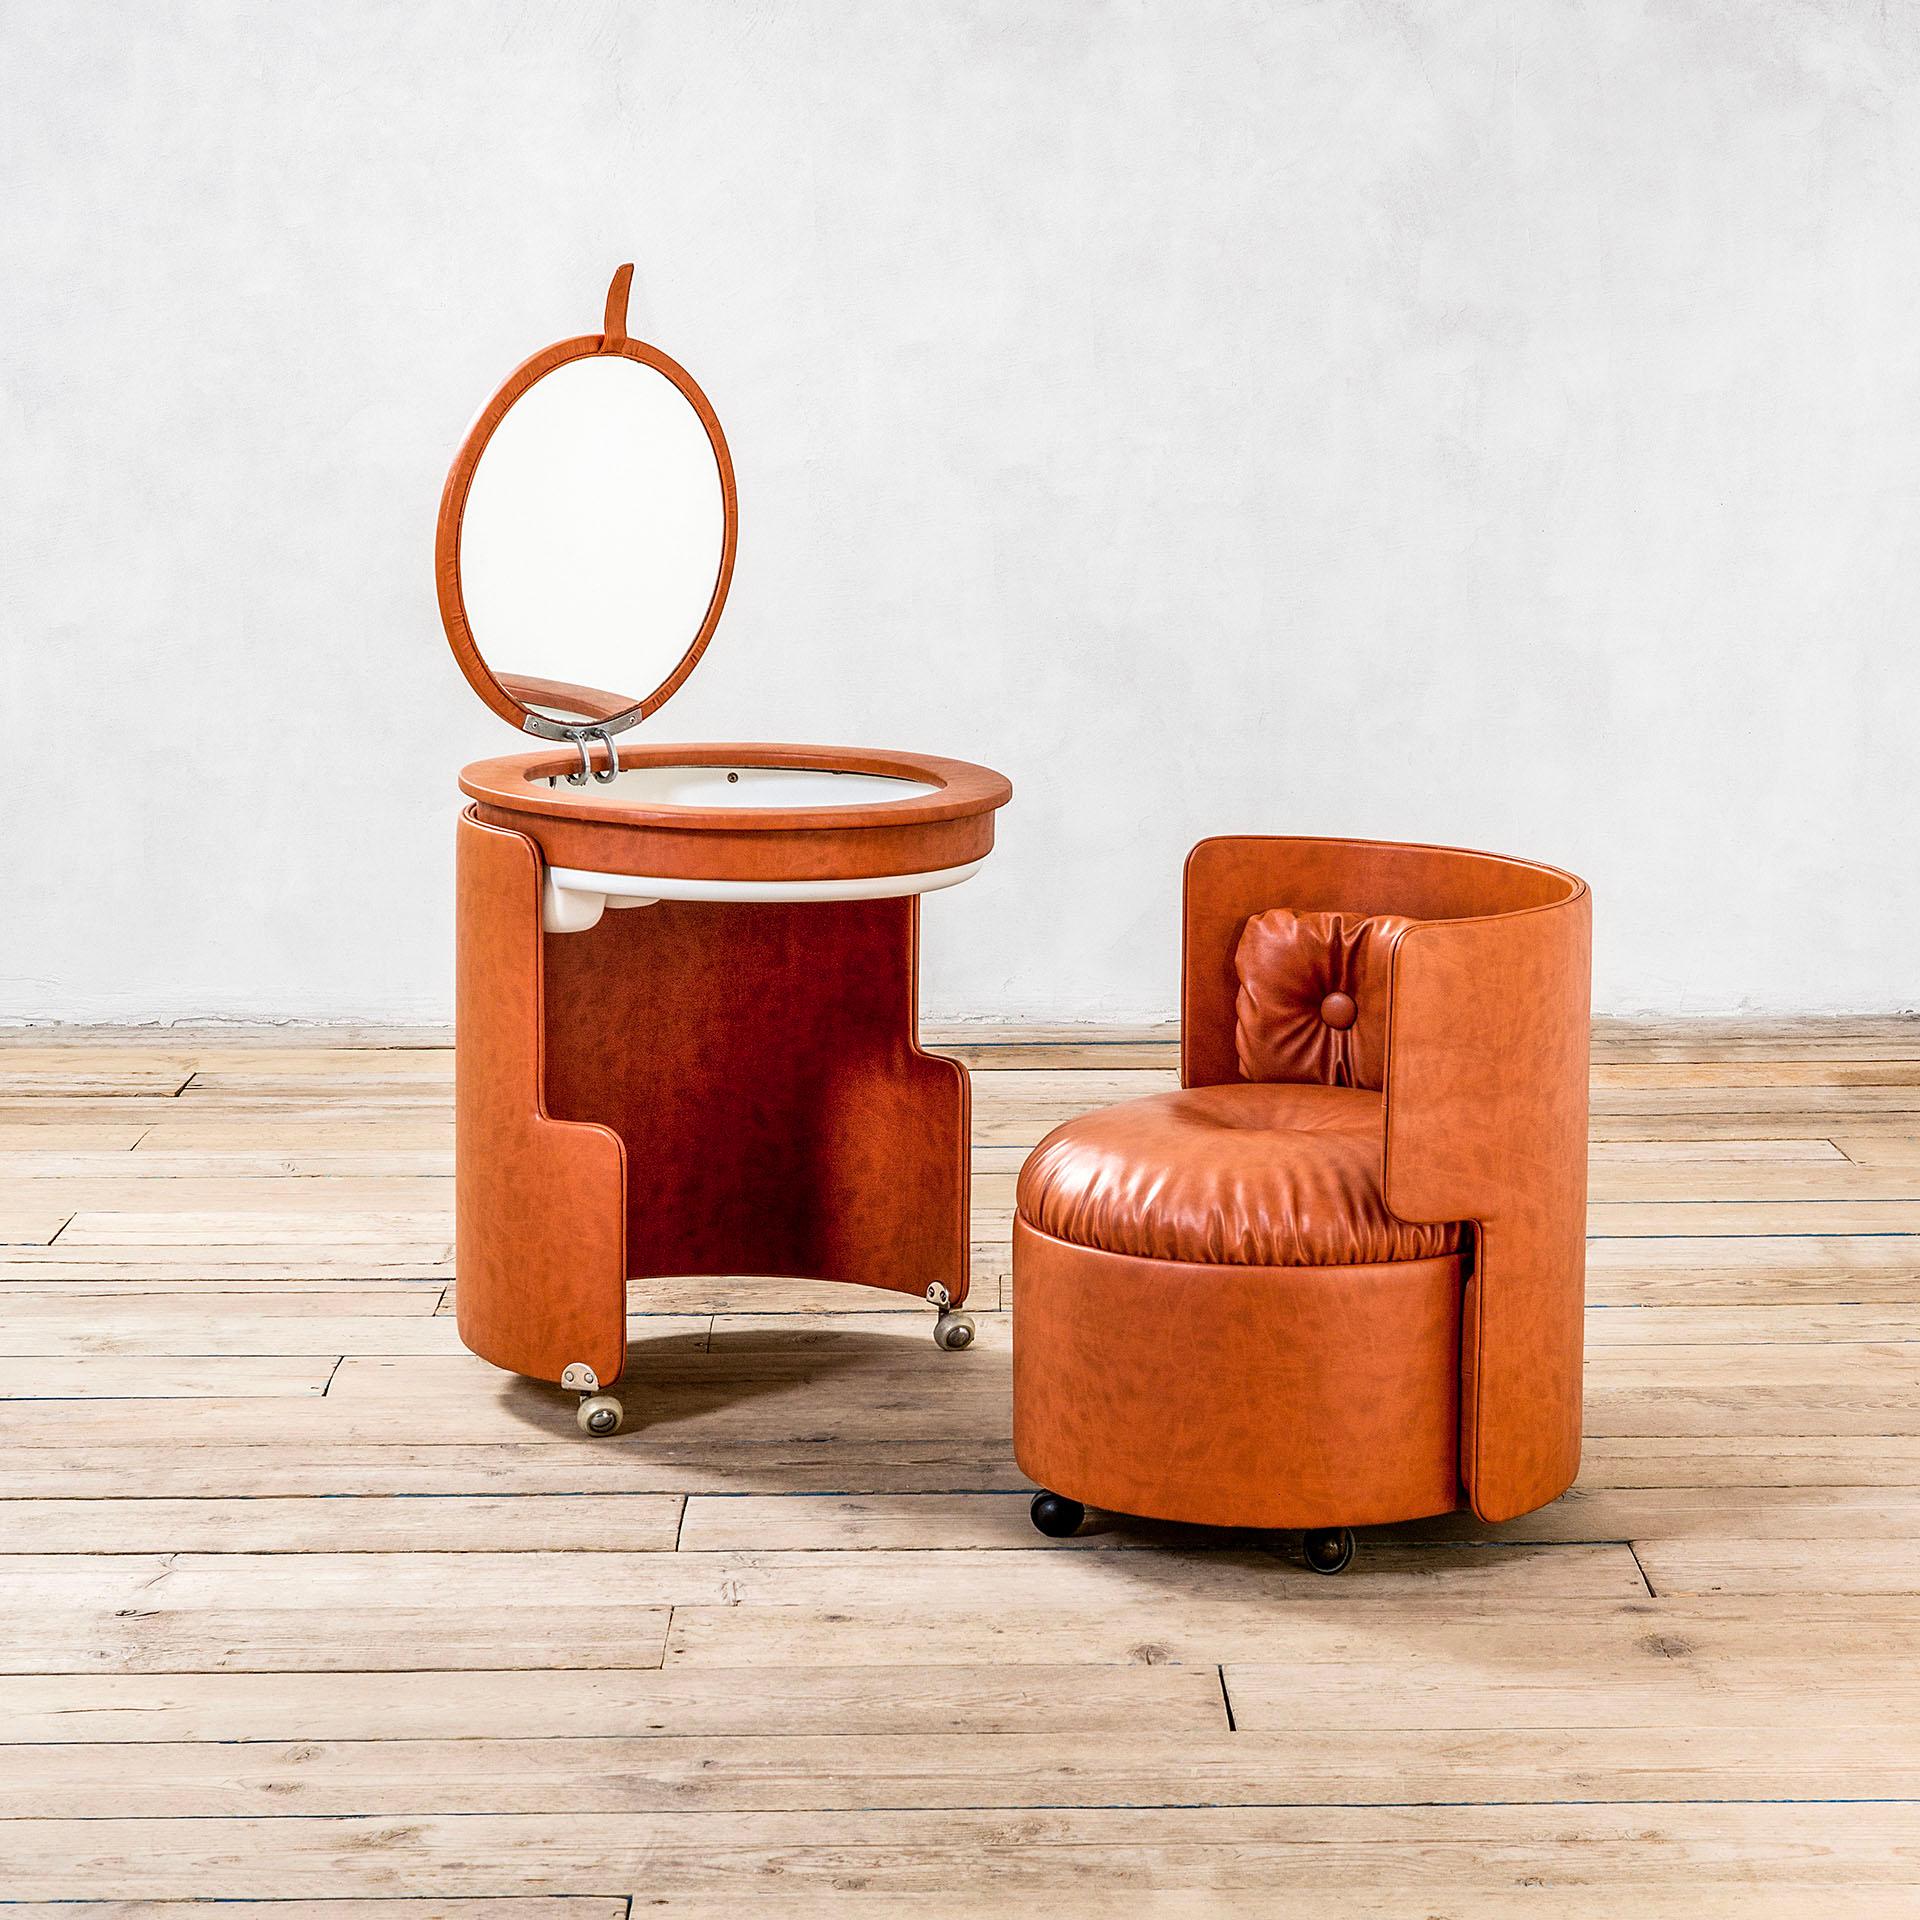 Dressing table model Dilly Dally designed by Luigi Massoni for Poltrona Frau in 1960s. The dressing table is composed of two pieces, one round armchair (which alone measures 70 x 65 x 60 cm) and the table itself with space for accessories and a